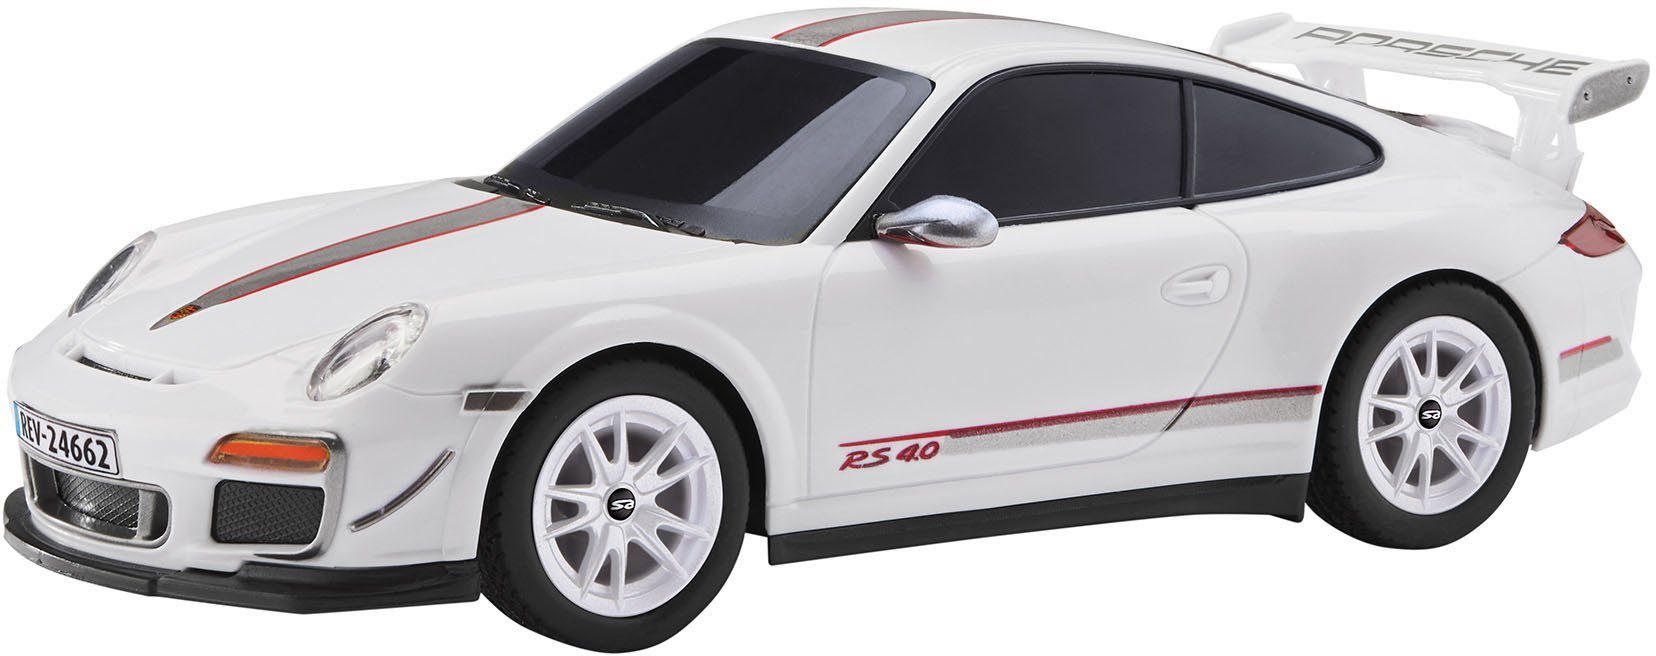 911 RC-Auto Revell® Revell® GT3 RS Porsche control,